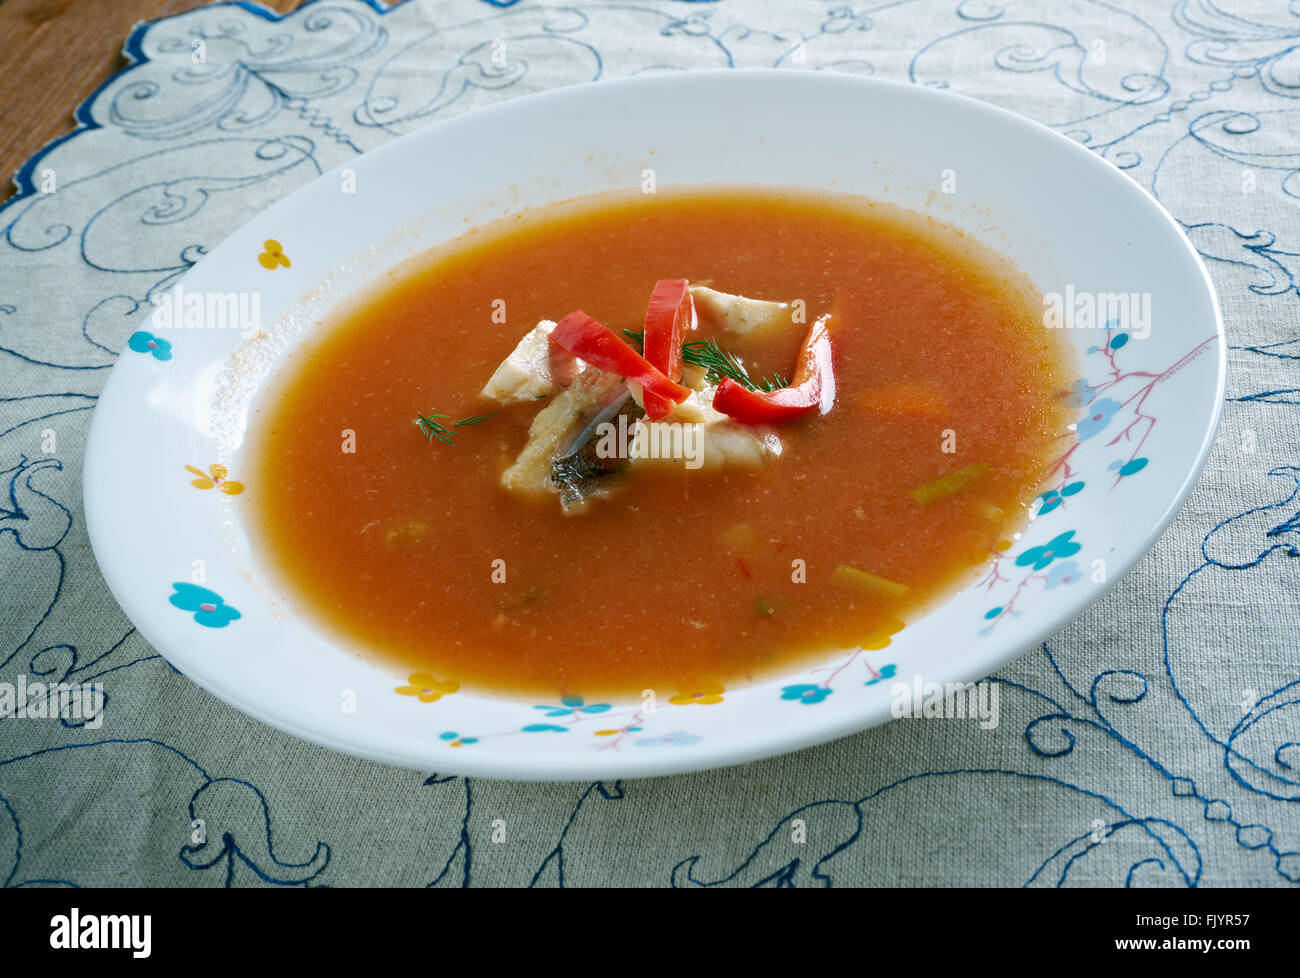 Pira caldo  fish soup that is part of the traditional cuisine of Paraguay. Stock Photo